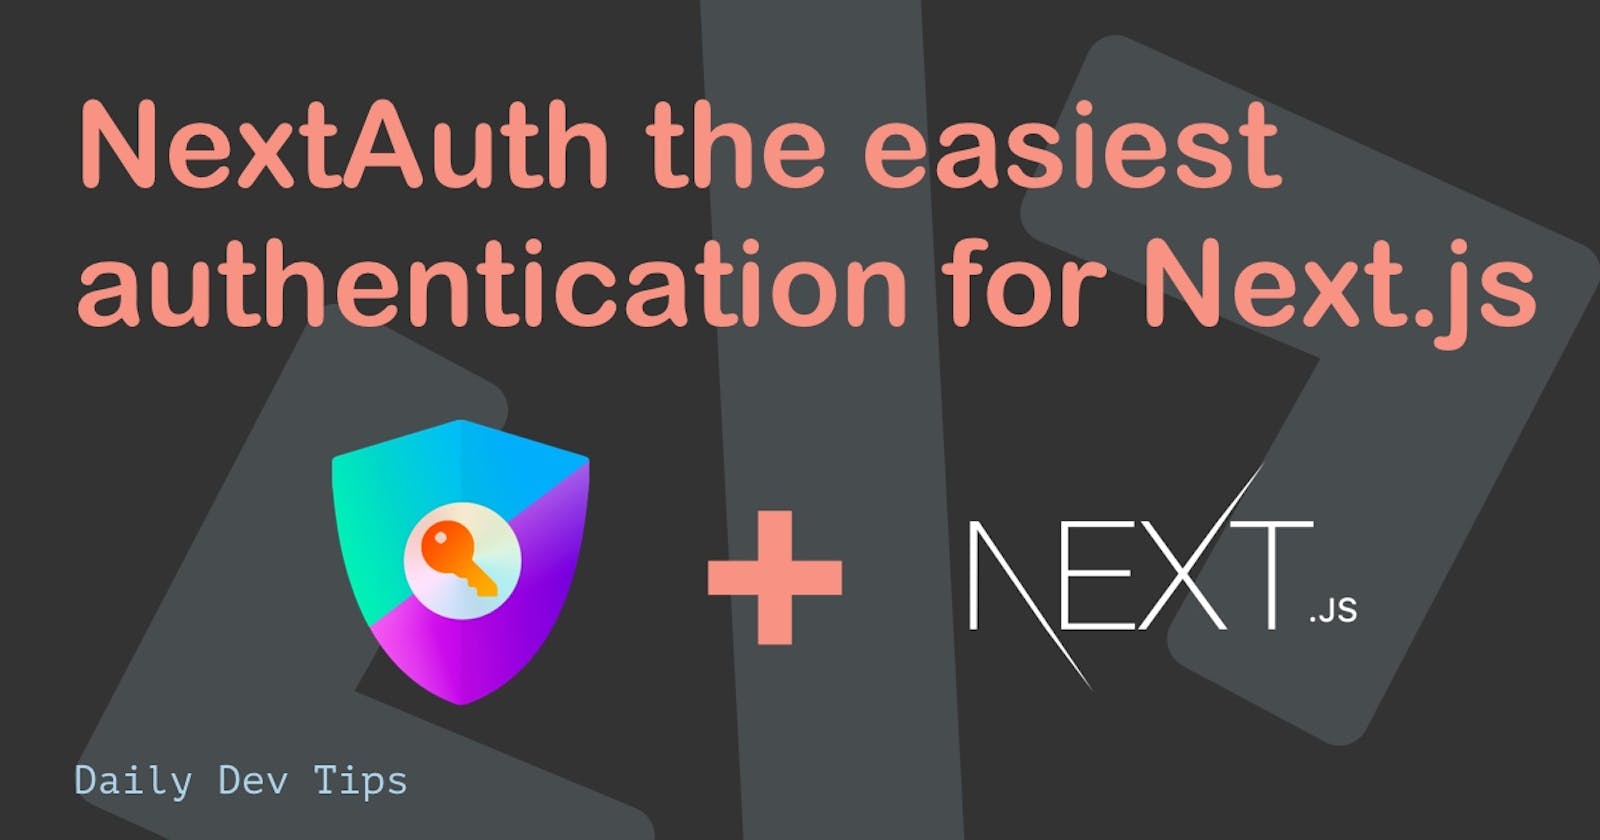 NextAuth the easiest authentication for Next.js